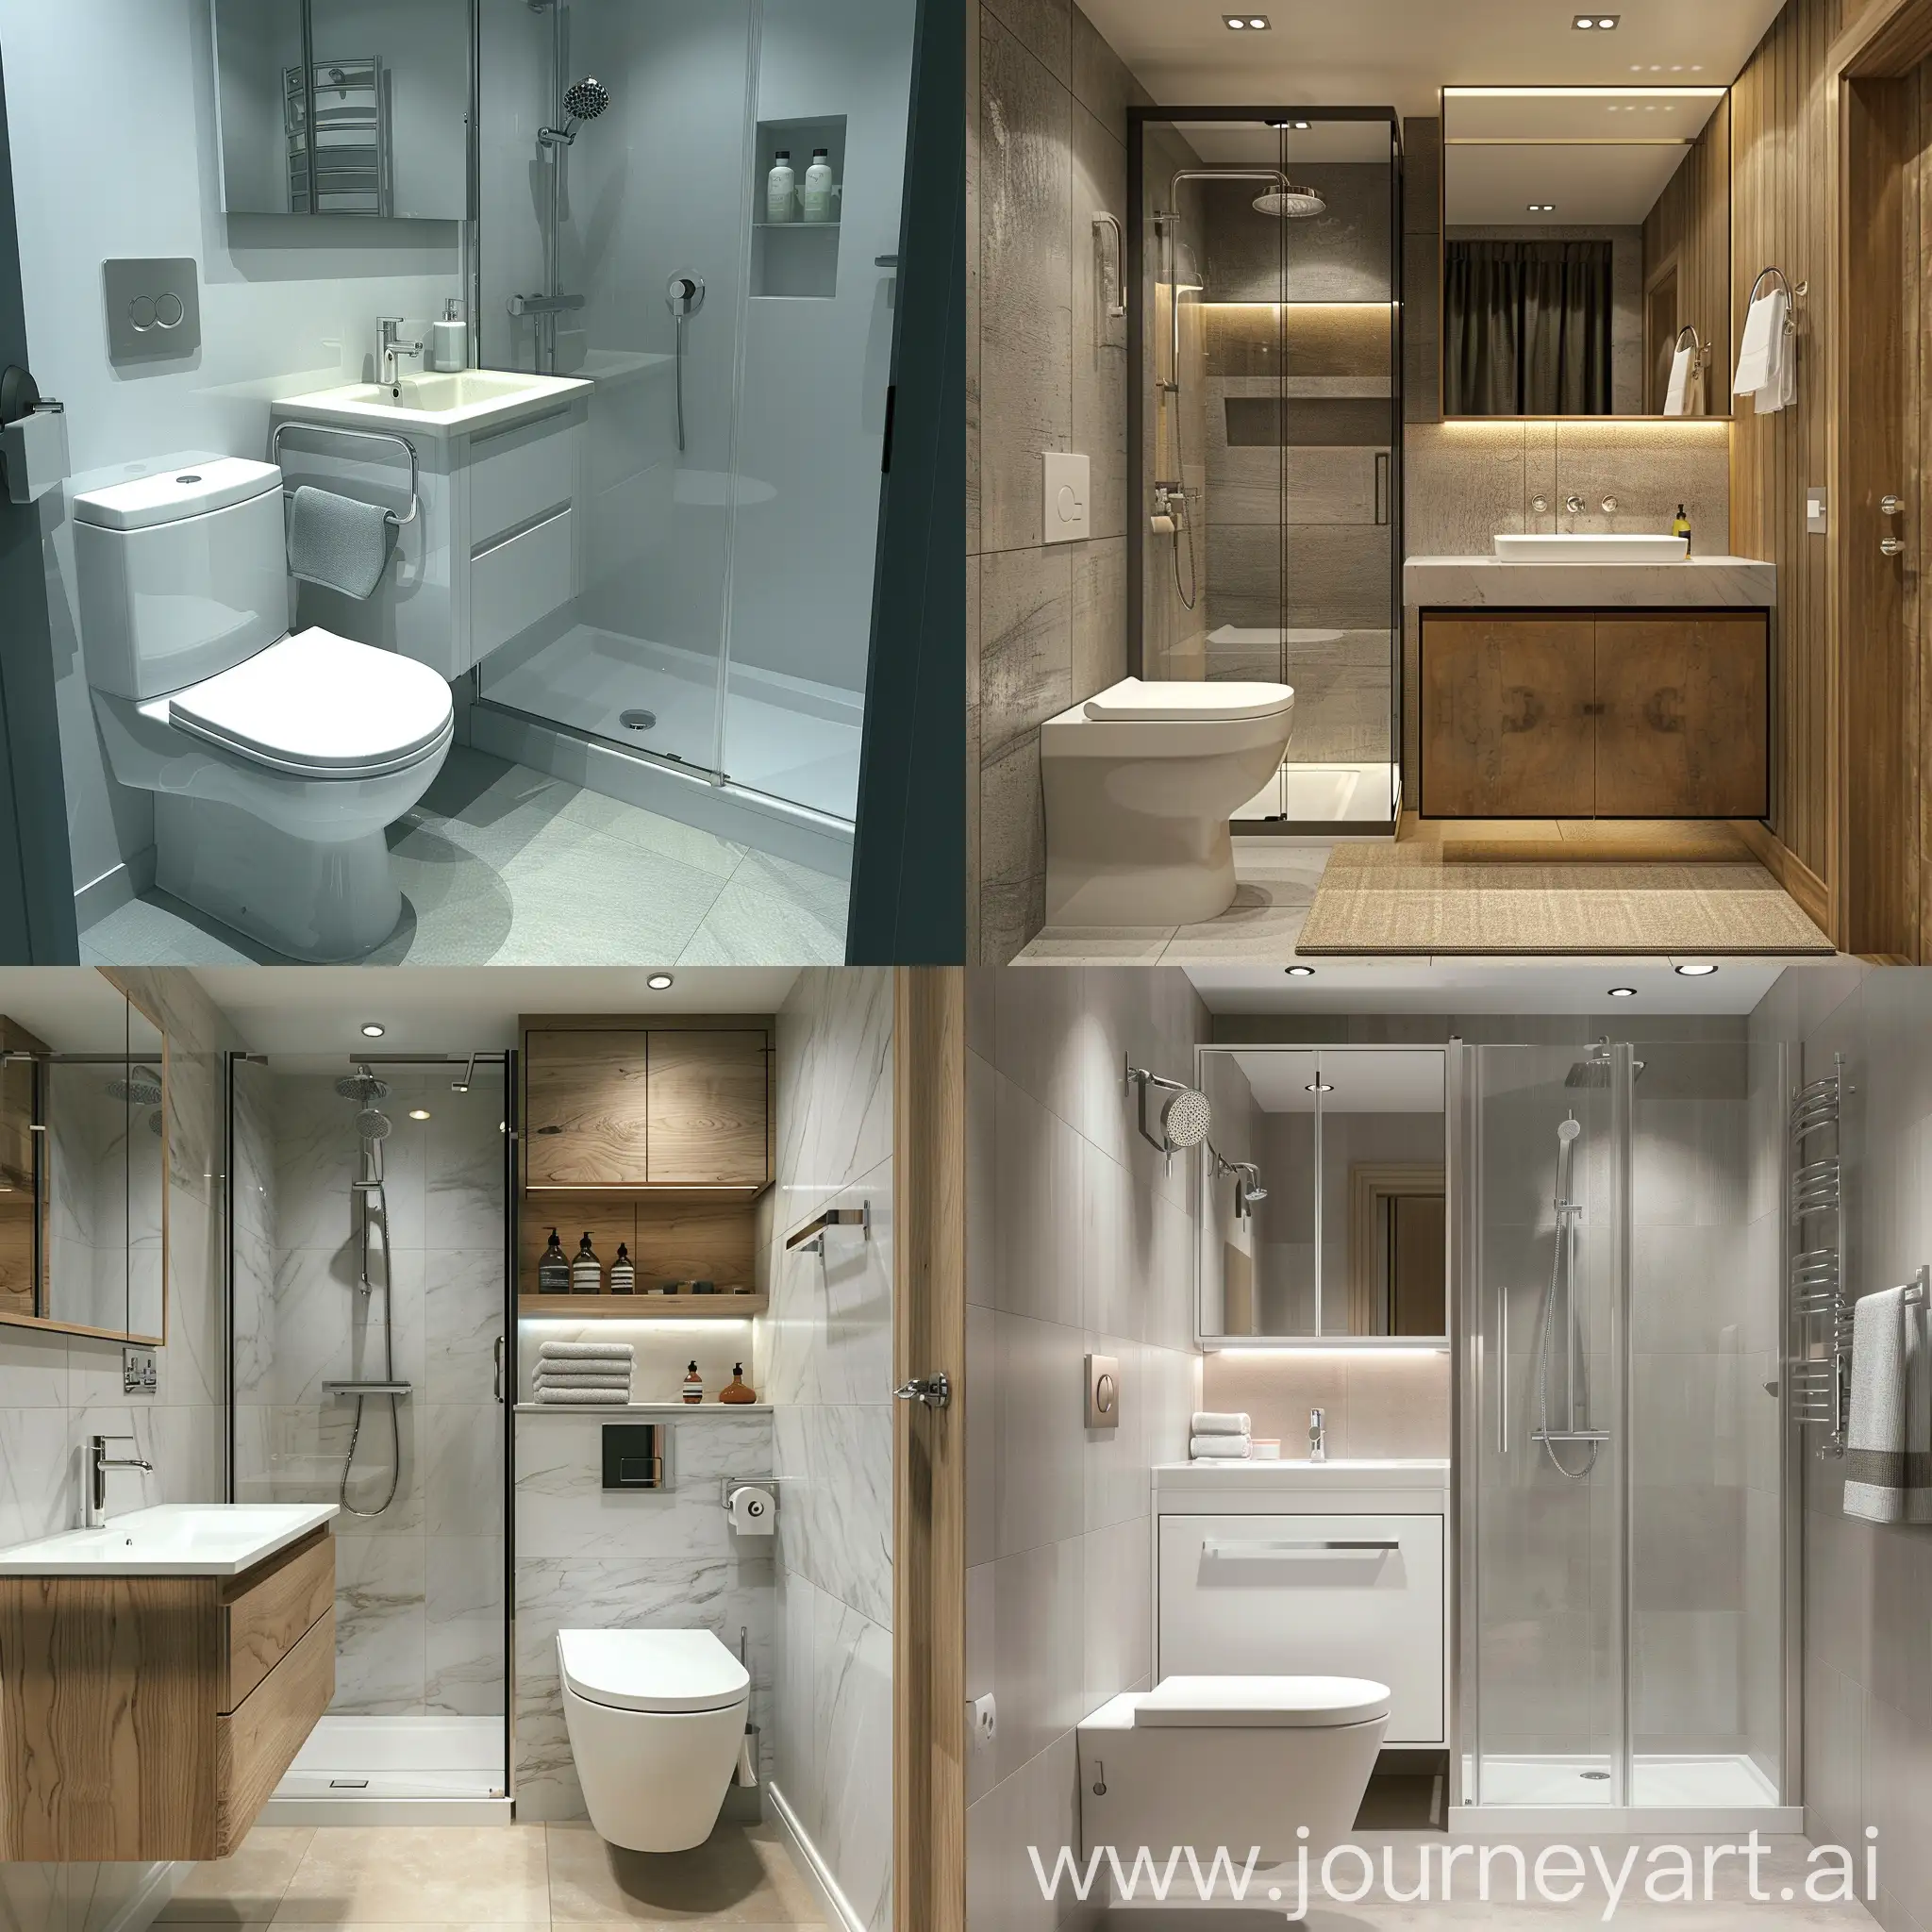 generate bathroom design for 6*4 bathroom area with toilet ,washbasin and shower